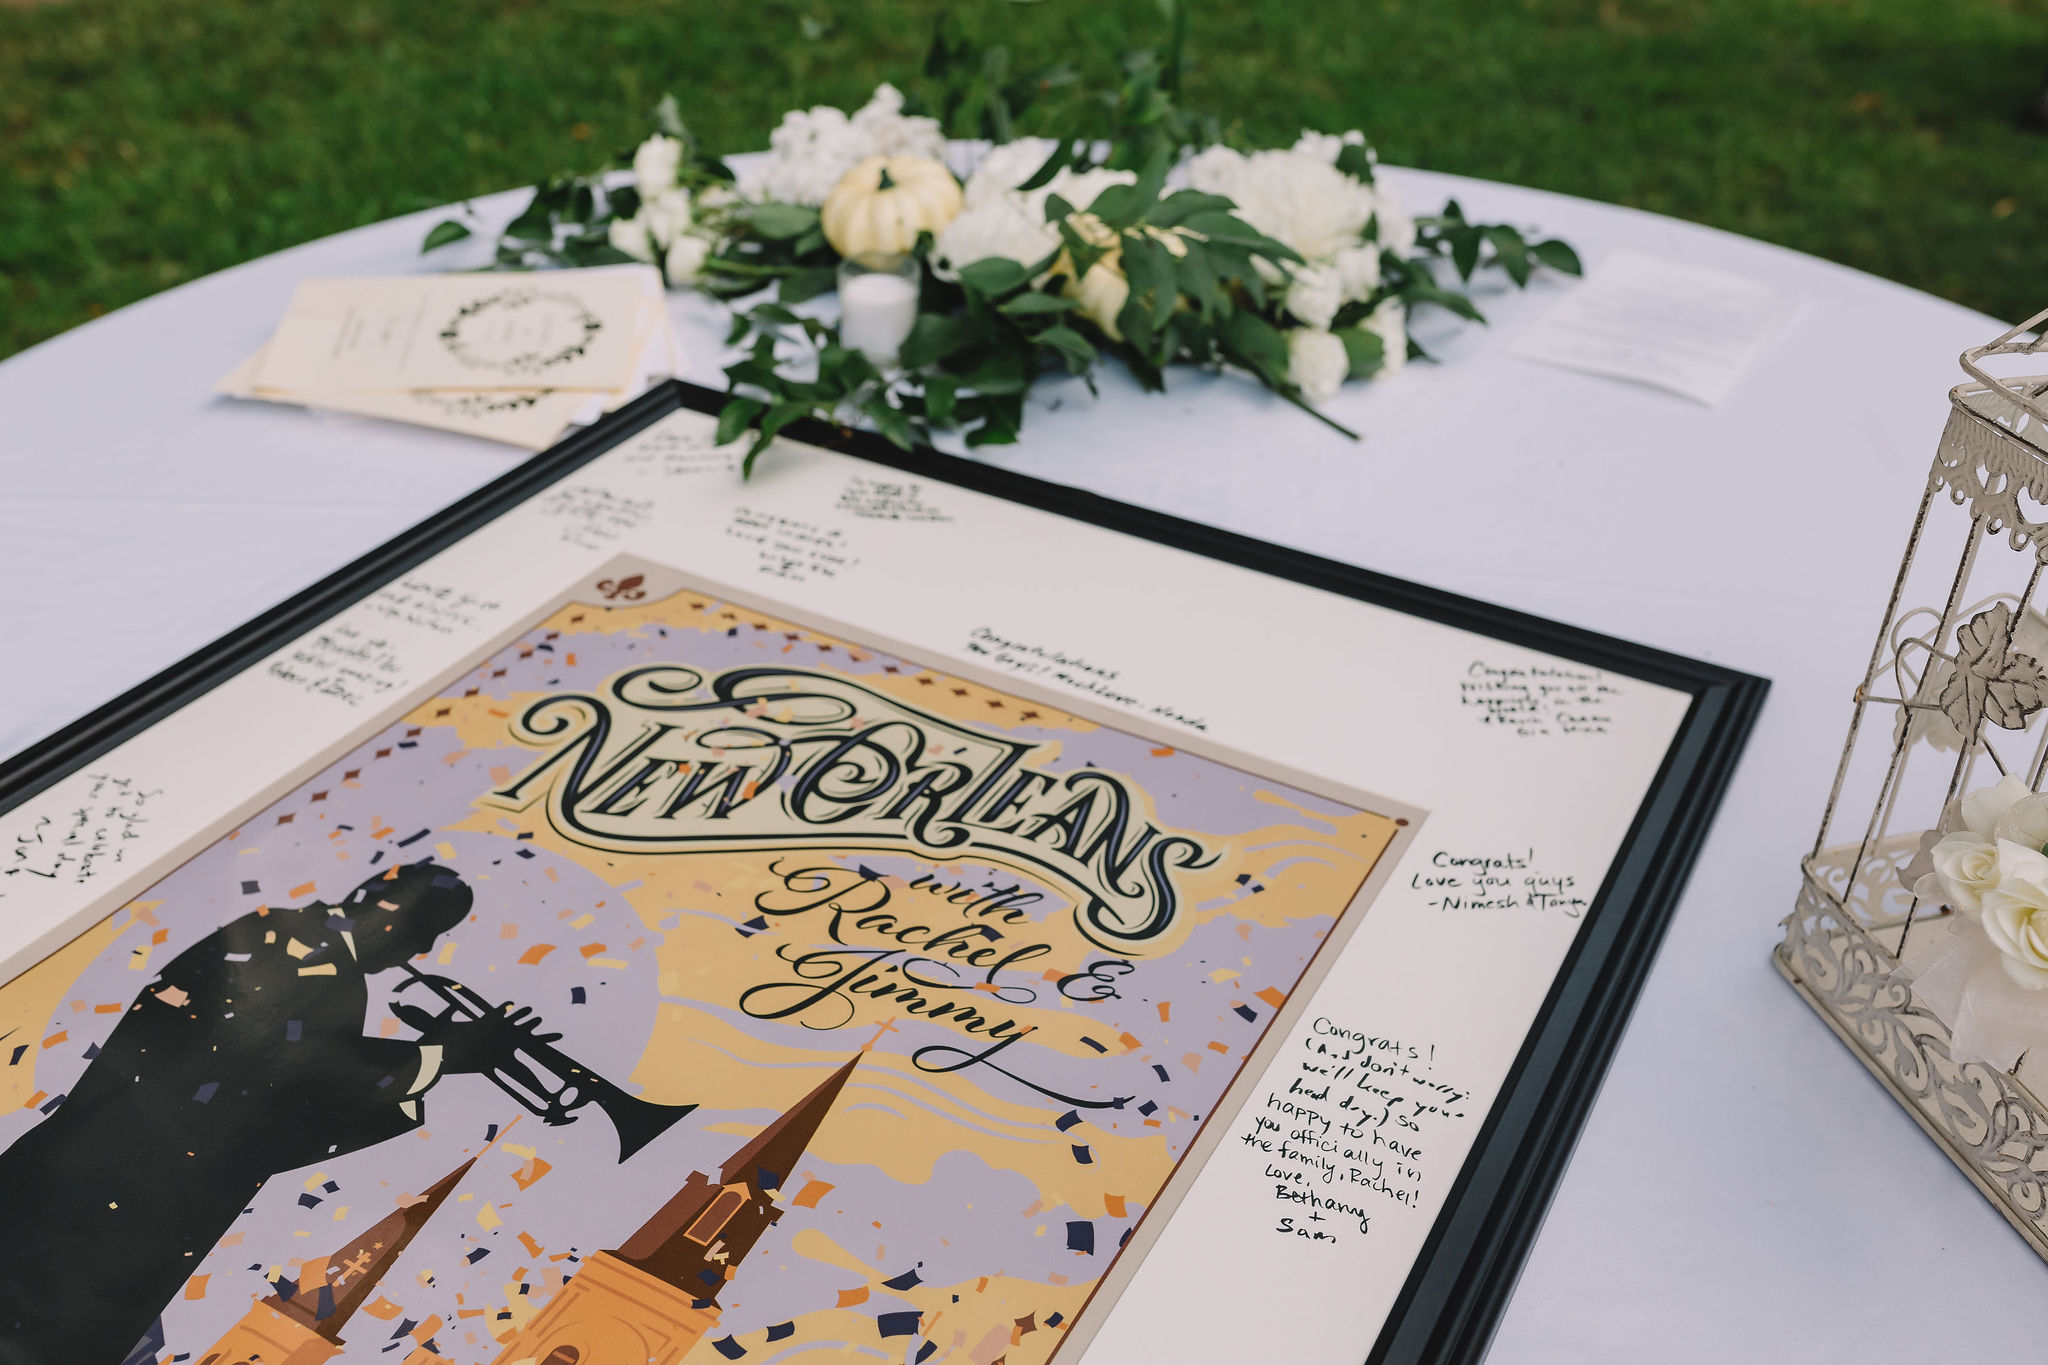 The couple opted for a non-traditional guest book for their wedding. The best man designed the image on the framed print that was also used for the Save the Dates!